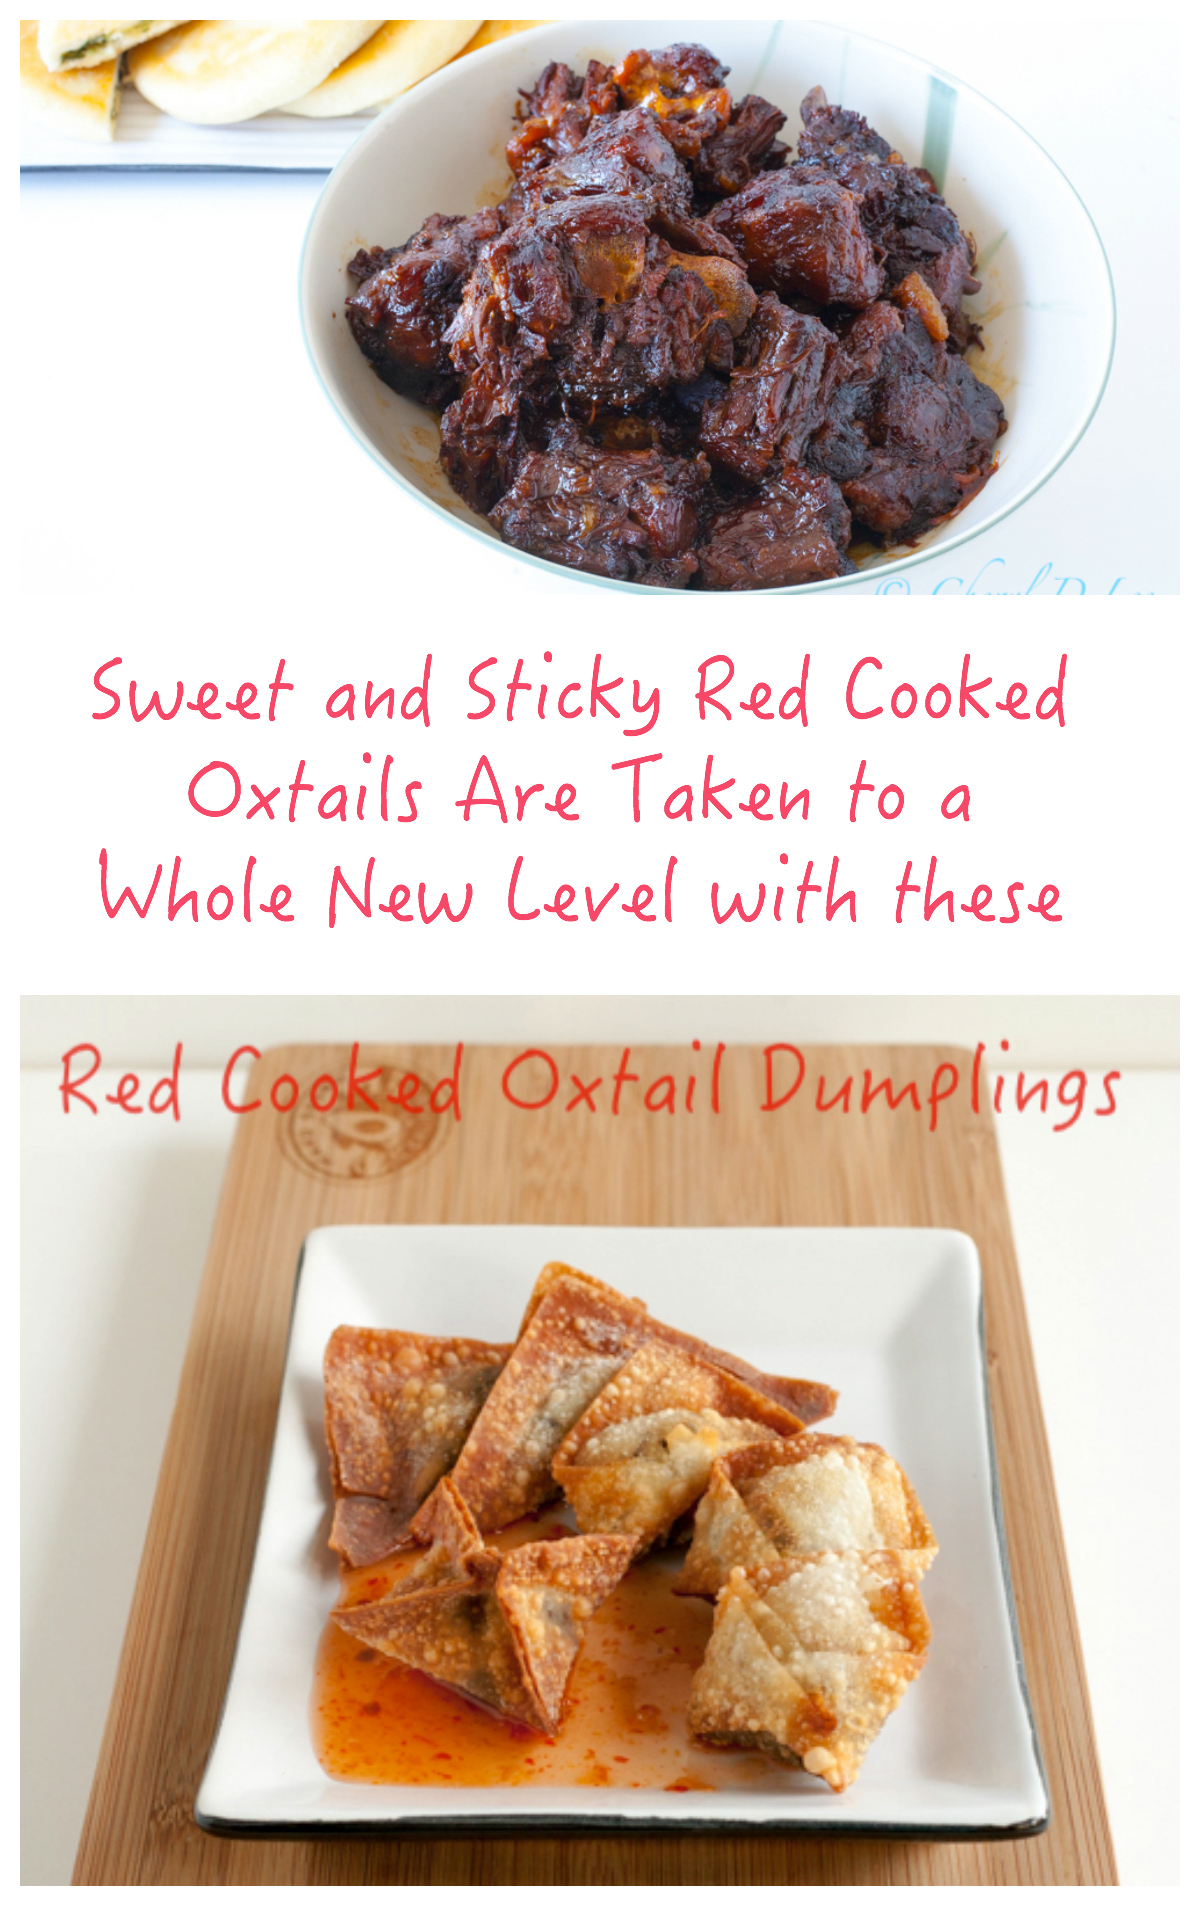 Red Cooked Oxtails Are Taken to a Whole New Level!